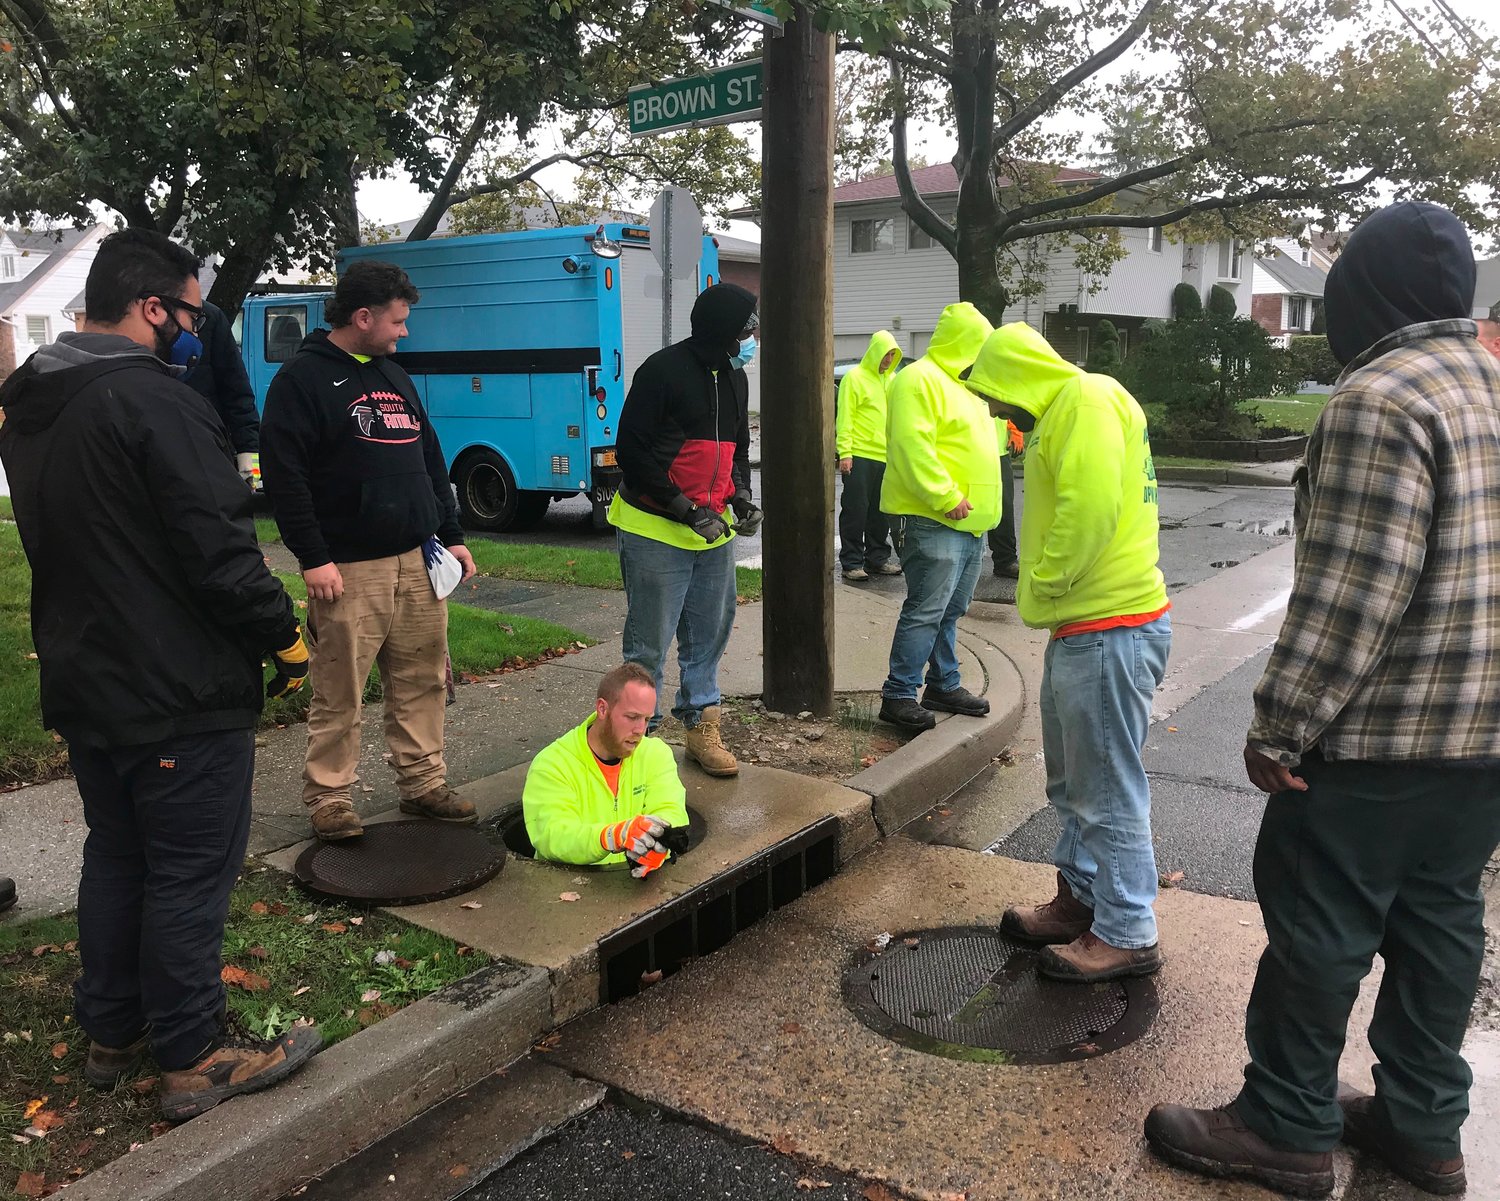 Village highway workers responded to a report of a kitten trapped in a storm drain on Brown Street Tuesday around noon. Worker Chris Sortile entered the drain to rescue the the kitten.